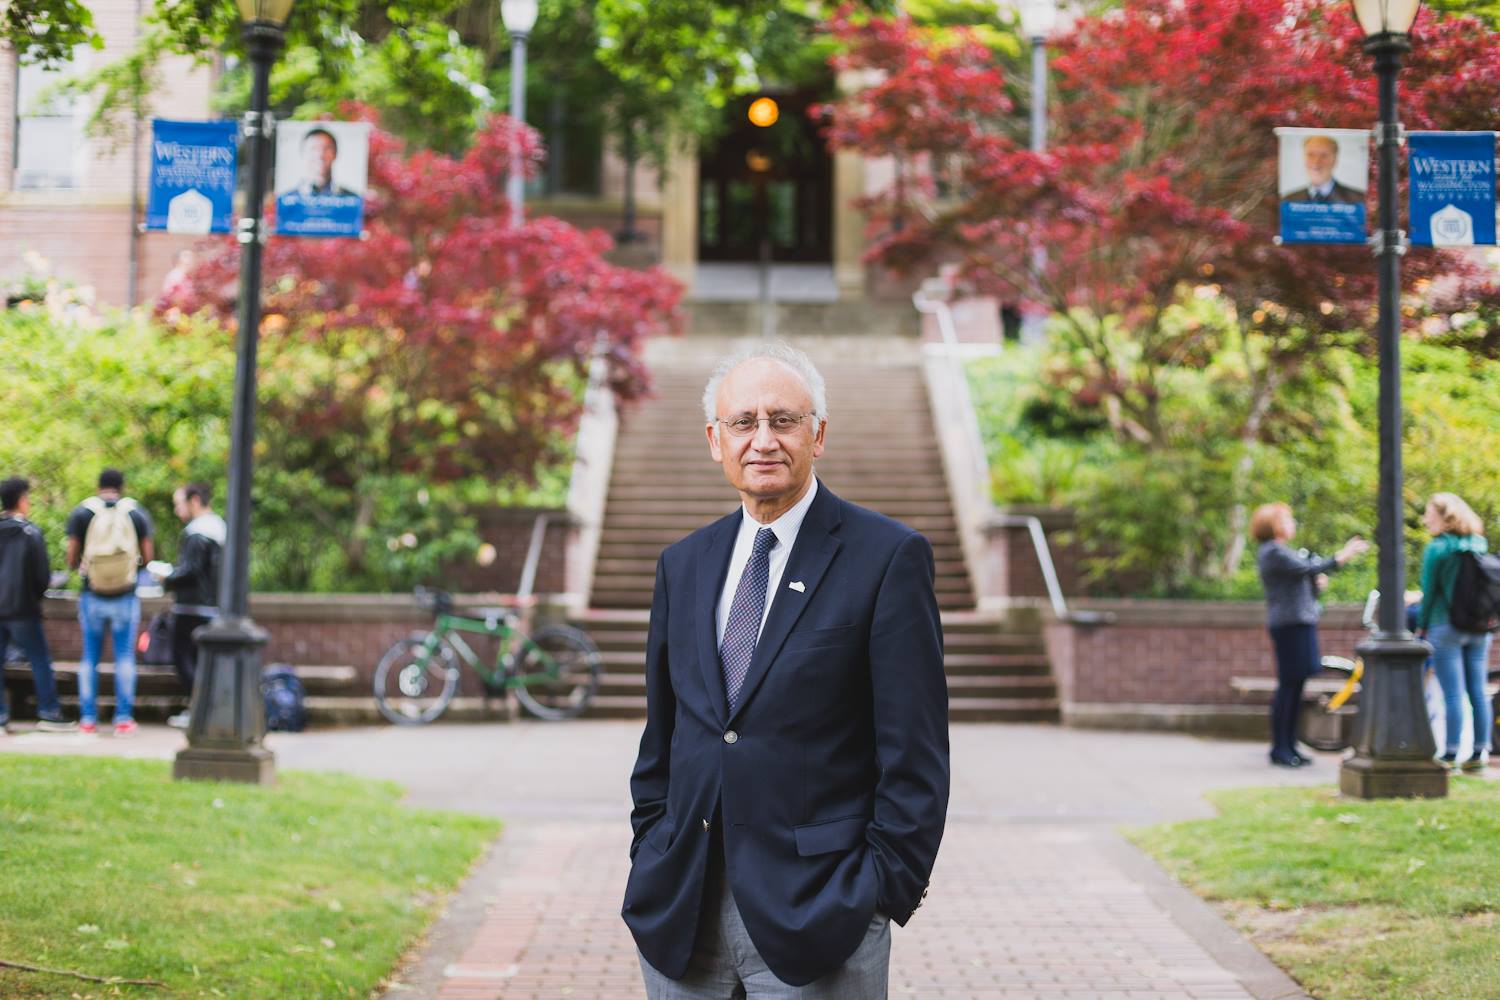 President Randhawa started work as Western&#039;s 14th President Aug. 1.